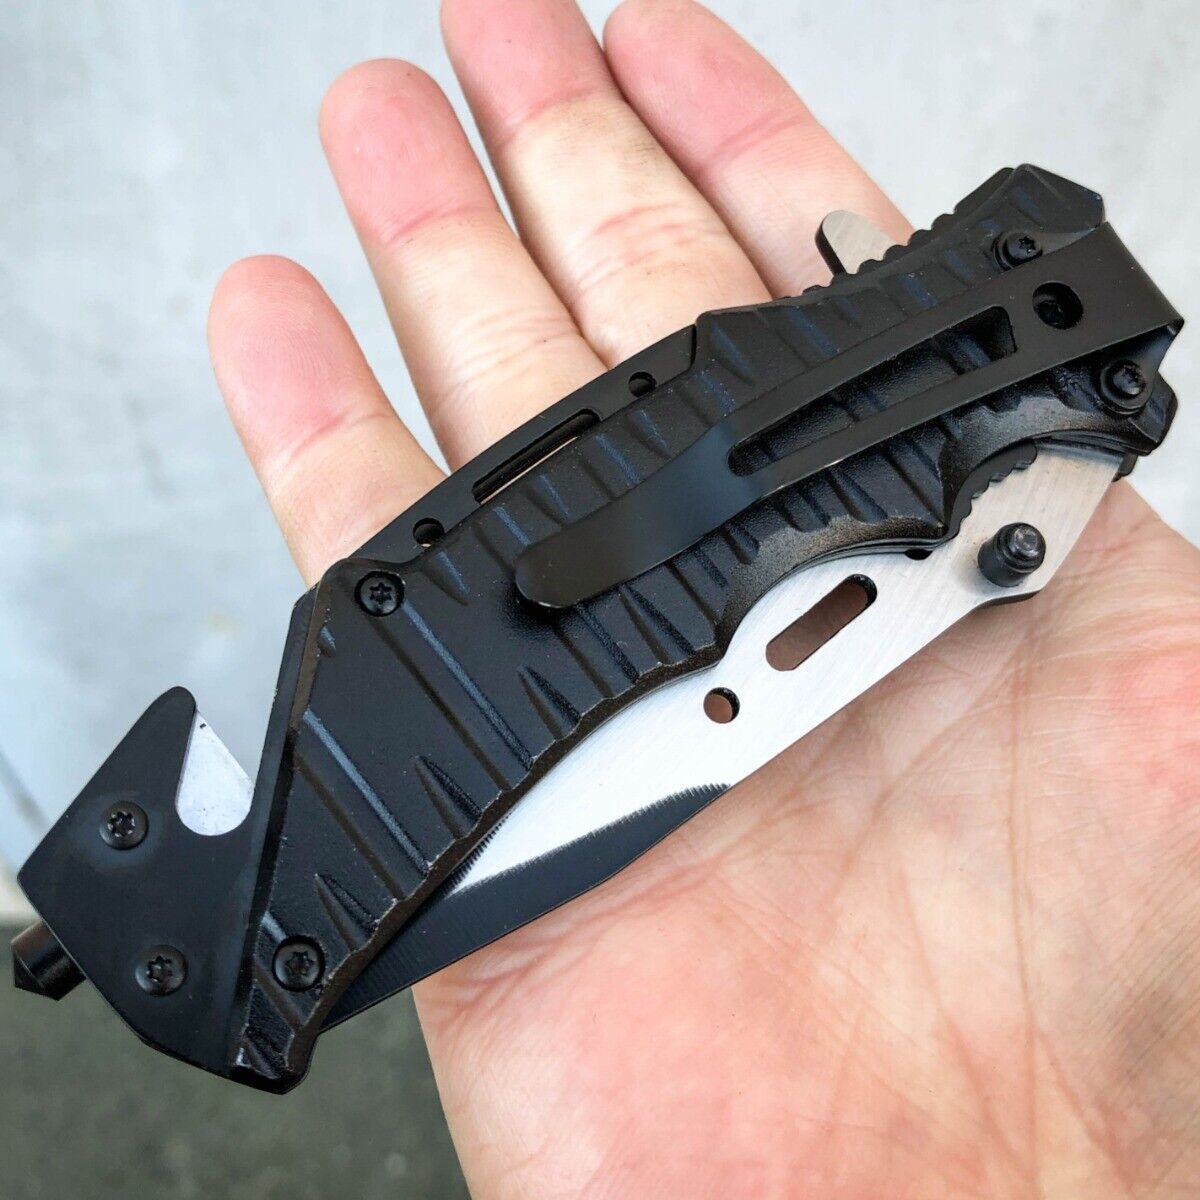 8.25" Military USMC MARINES Assisted Folding Rescue Pocket Knife Multi Tool NEW Defender Does Not Apply - фотография #3